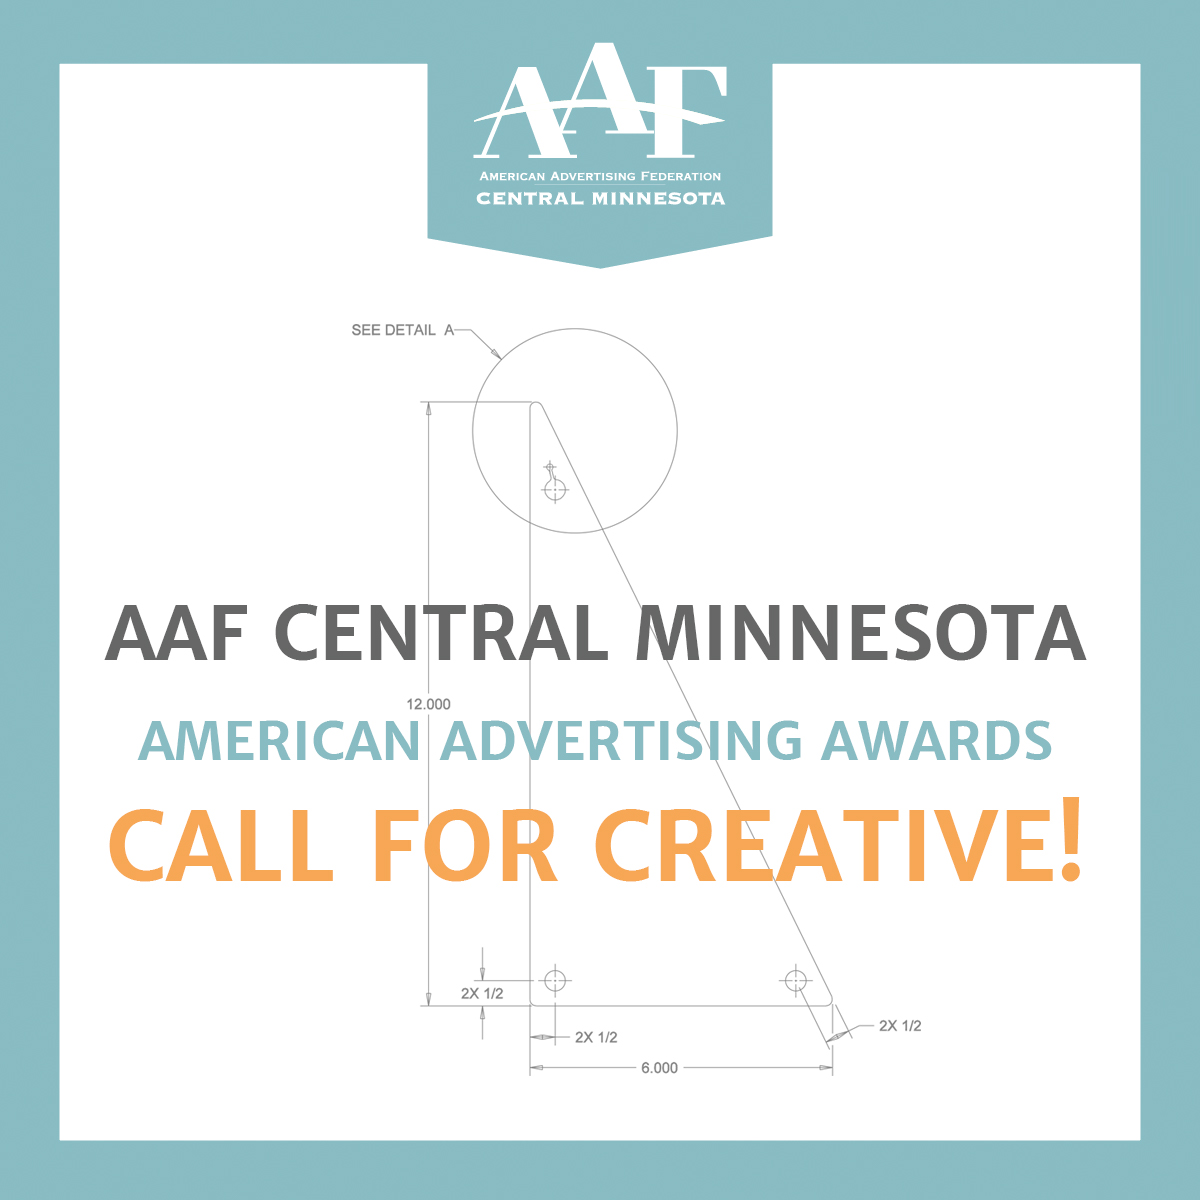 AAF Central Minnesota American Advertising Awards – Call For Creative!